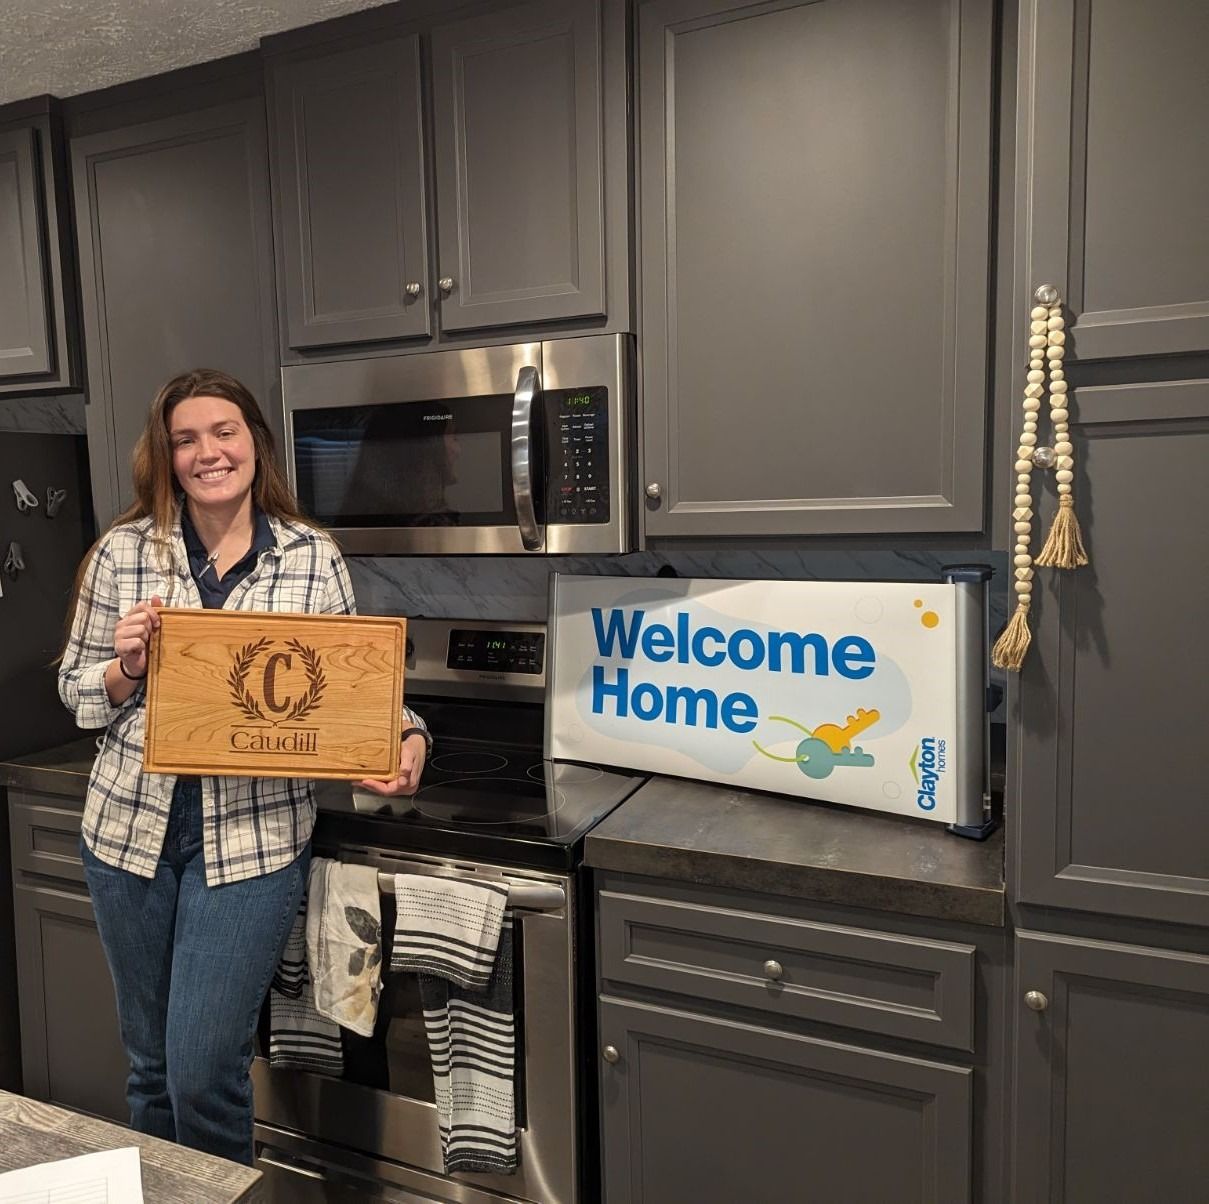 DAWN C. welcome home image